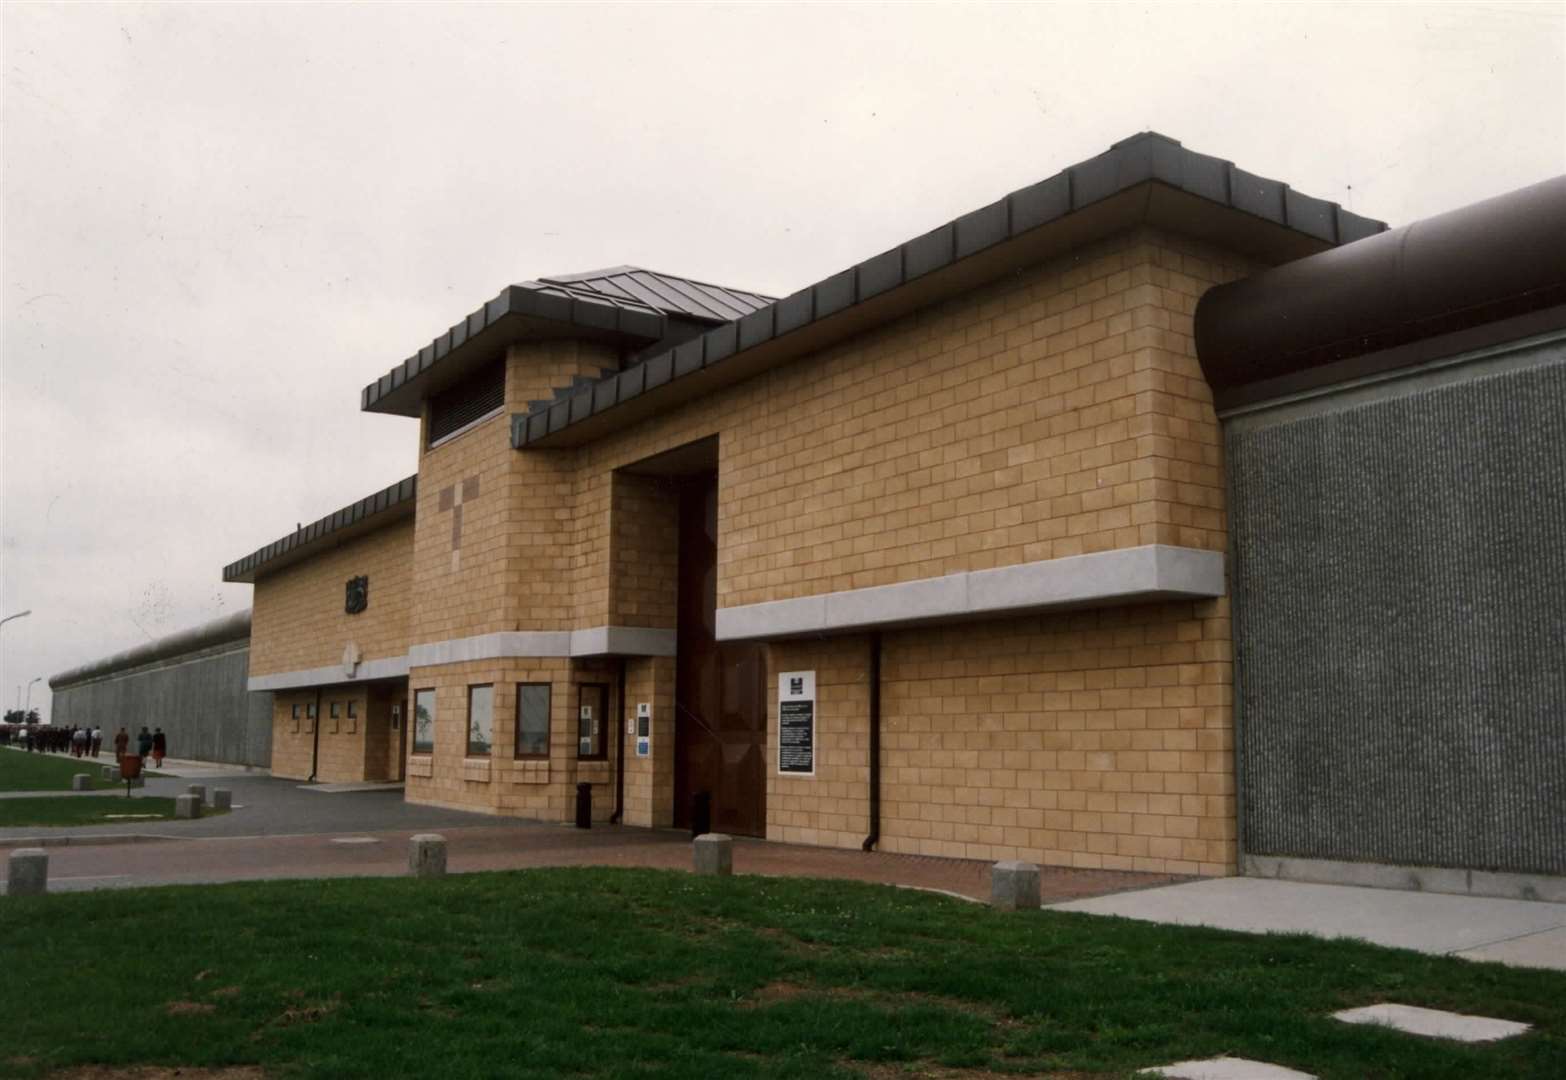 Elmley Prison, Eastchurch, on the Isle of Sheppey